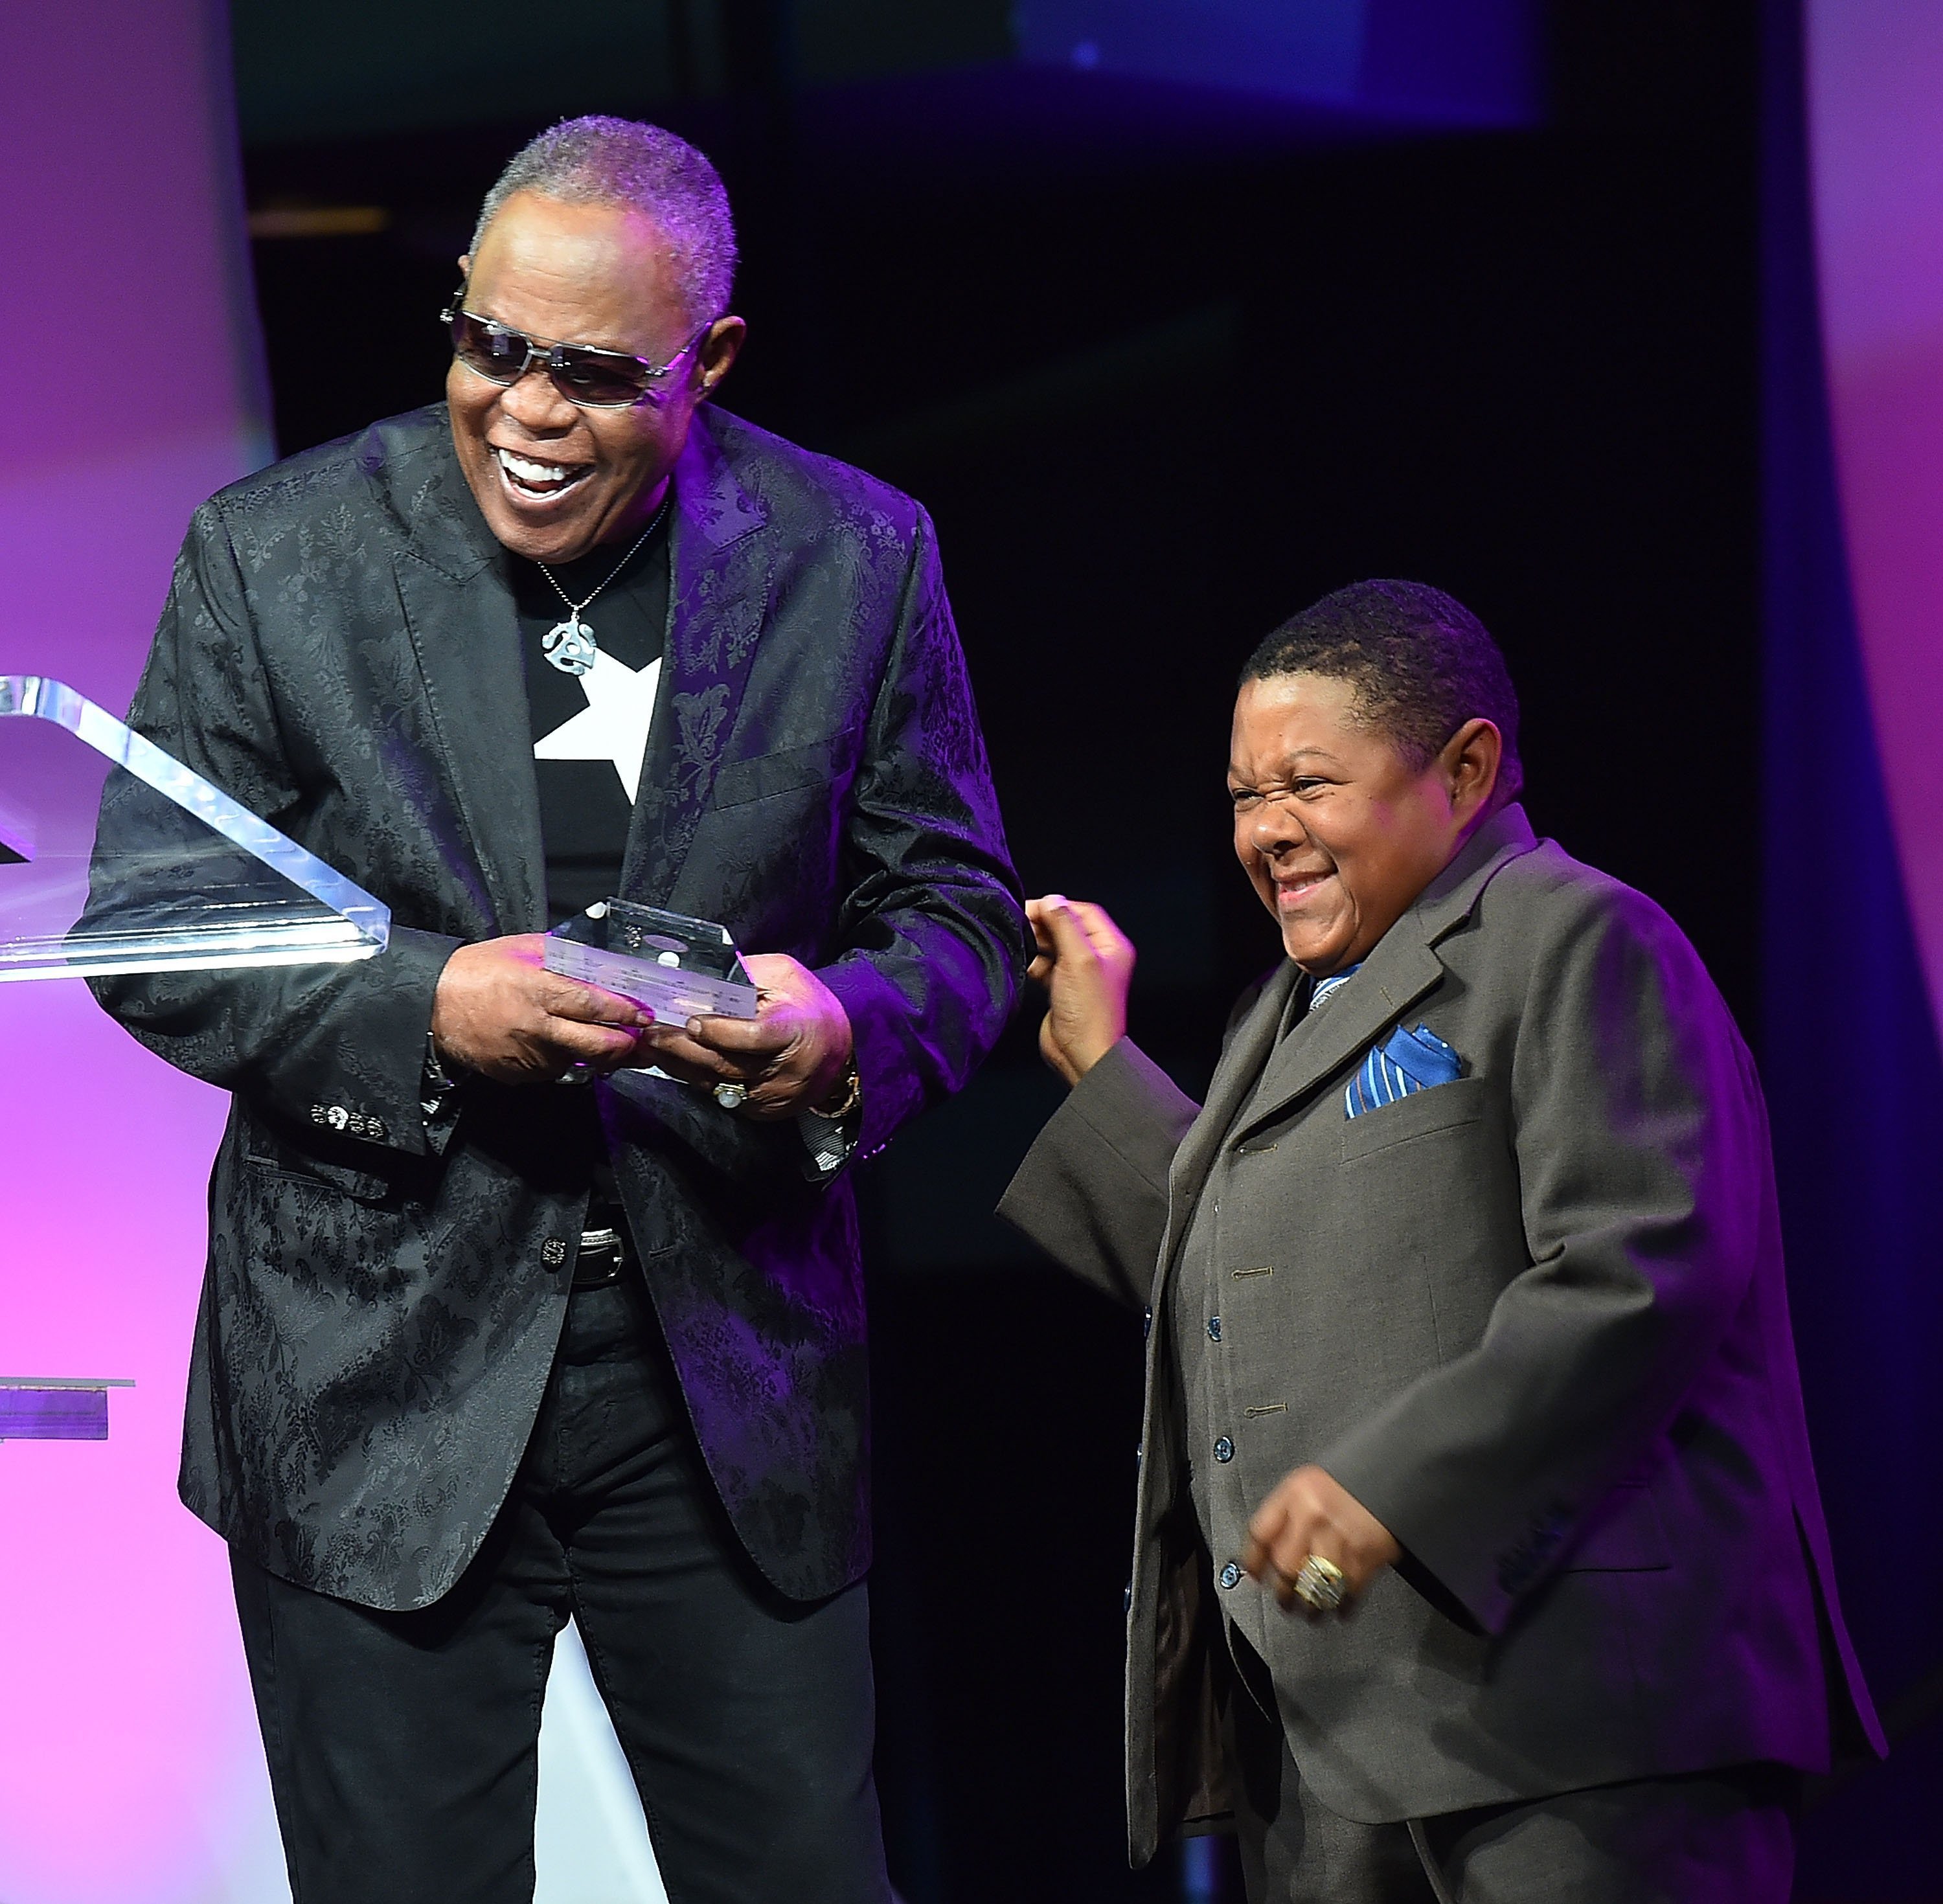 Sam Moore and actor Emmanuel Lewis onstage at Georgia Music Hall Of Fame Awards. | Source: Getty Images